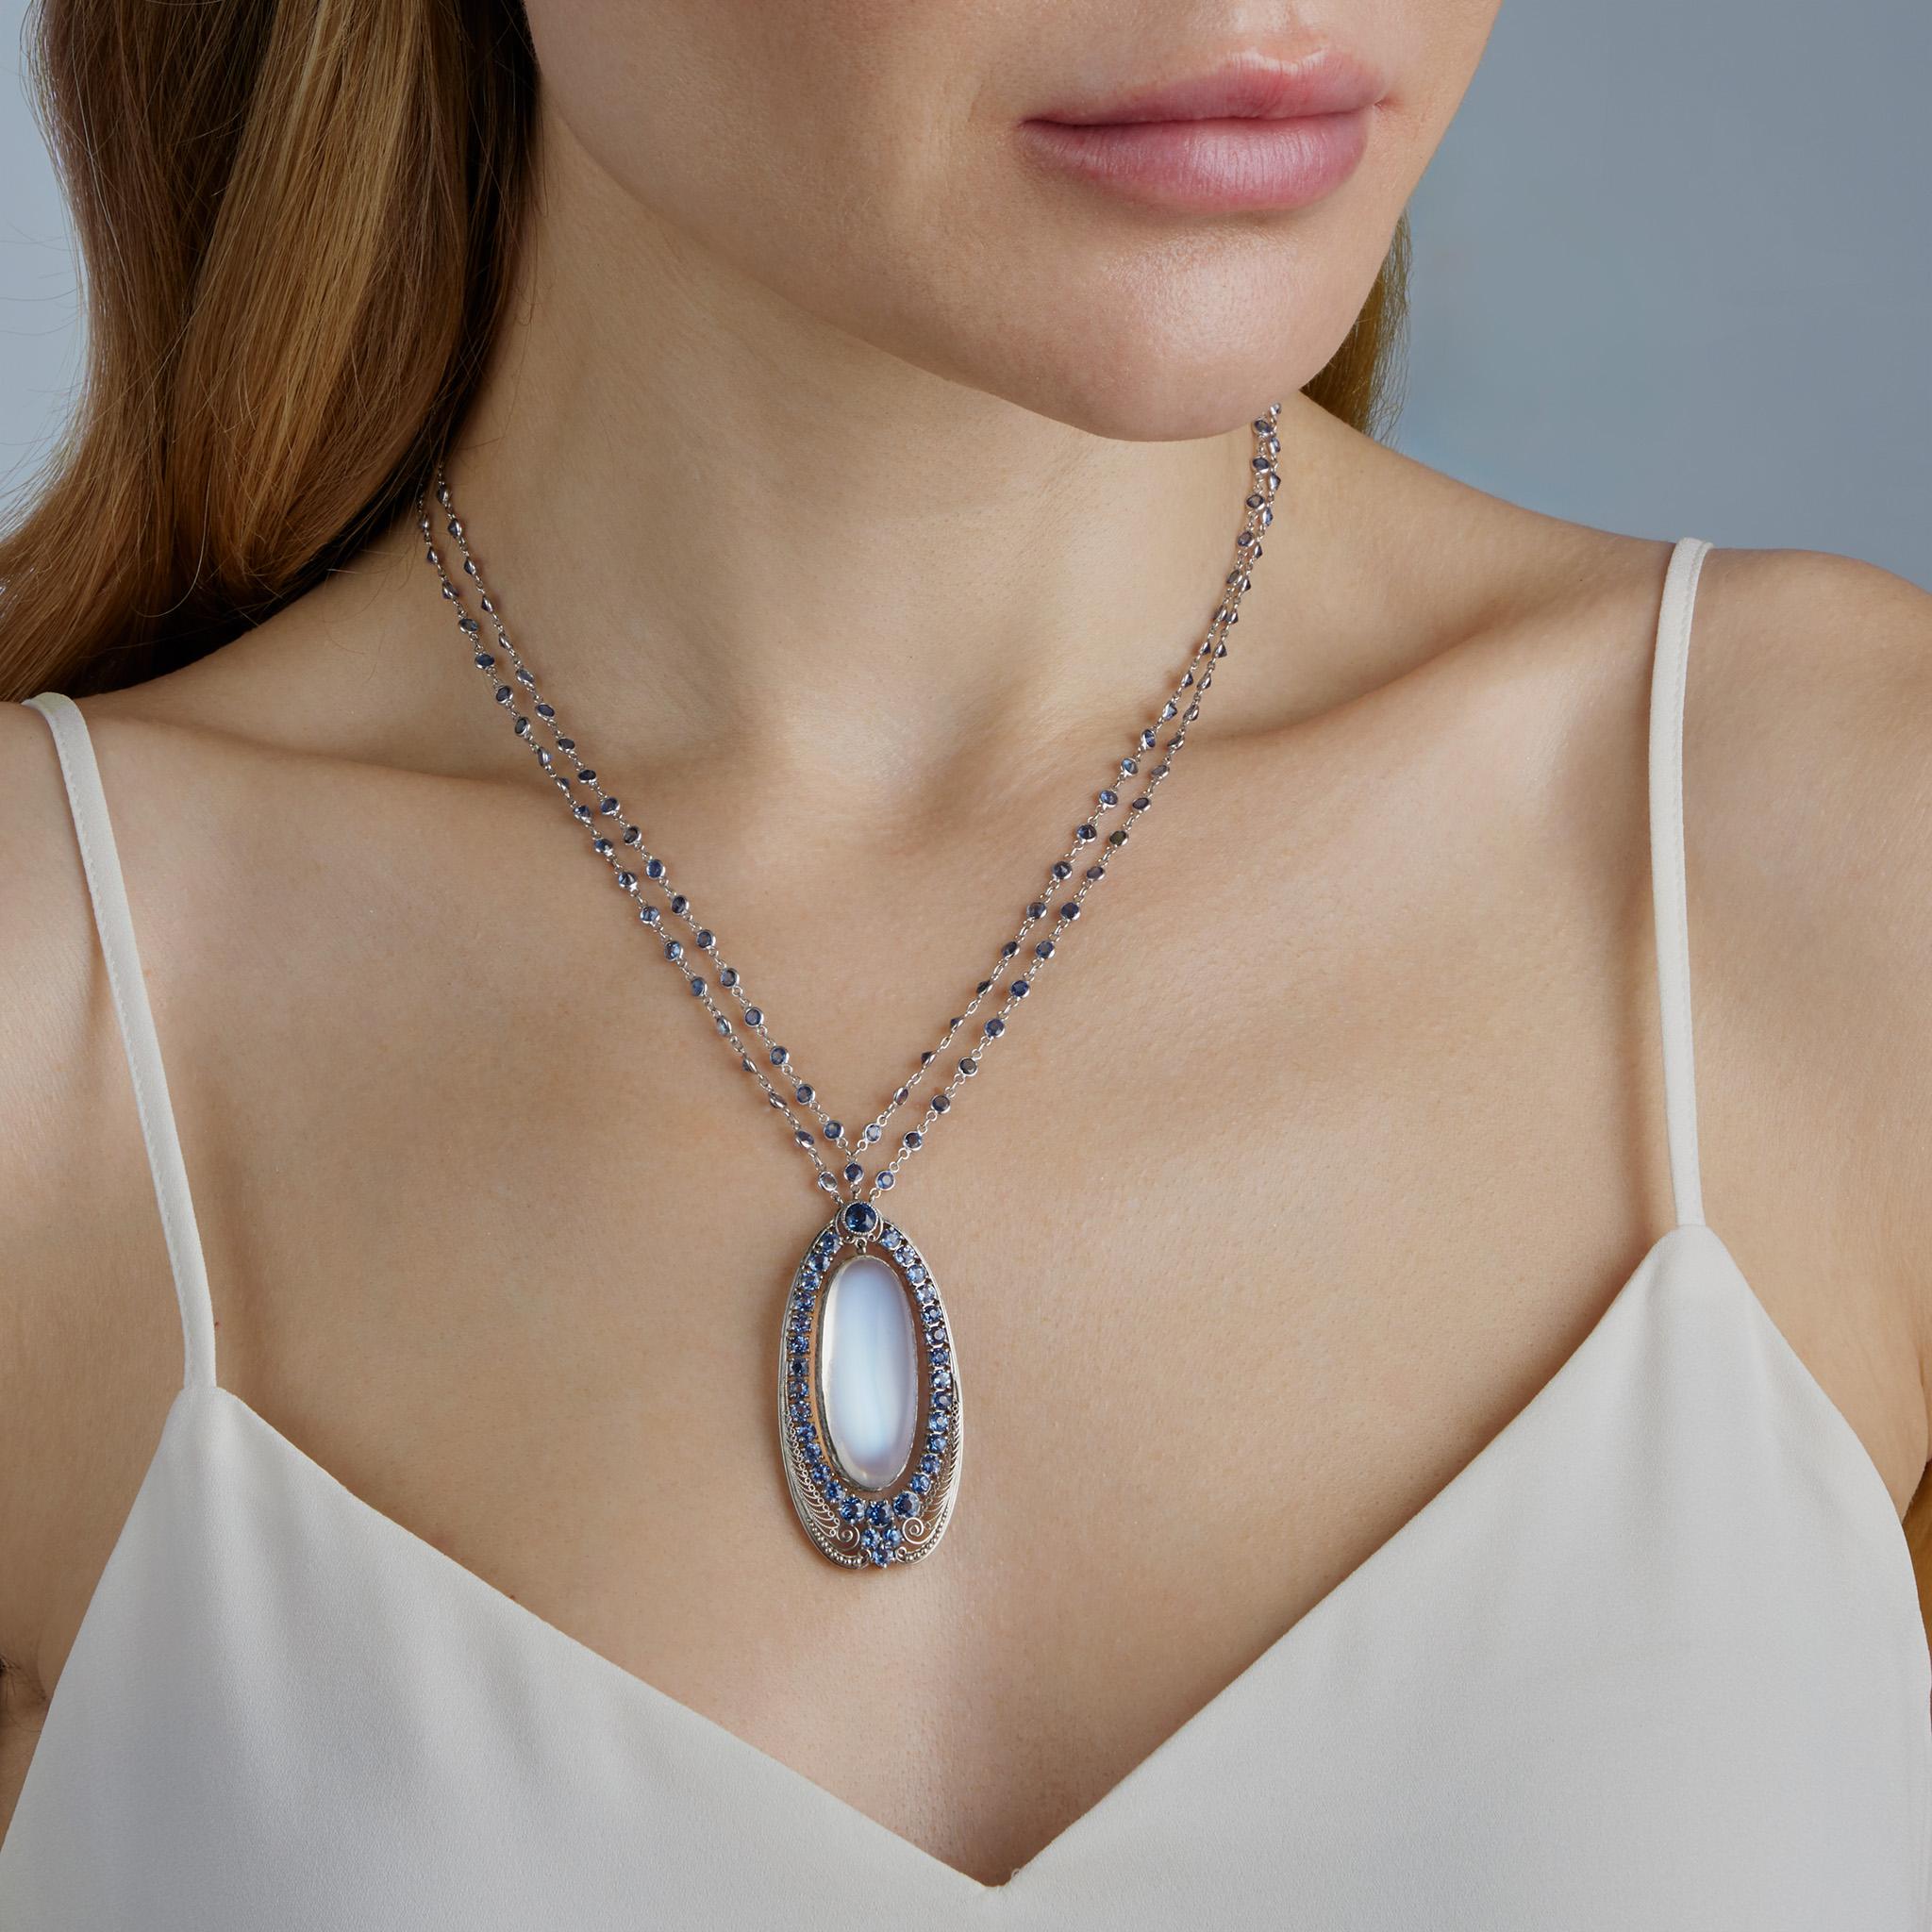 Designed and fully hand created by Louis Comfort Tiffany and his jewelry studio between approximately 1910 and 1920, this moonstone, sapphire and platinum pendant hangs from a later sapphire chain. The pendant is designed as an elongated teardrop